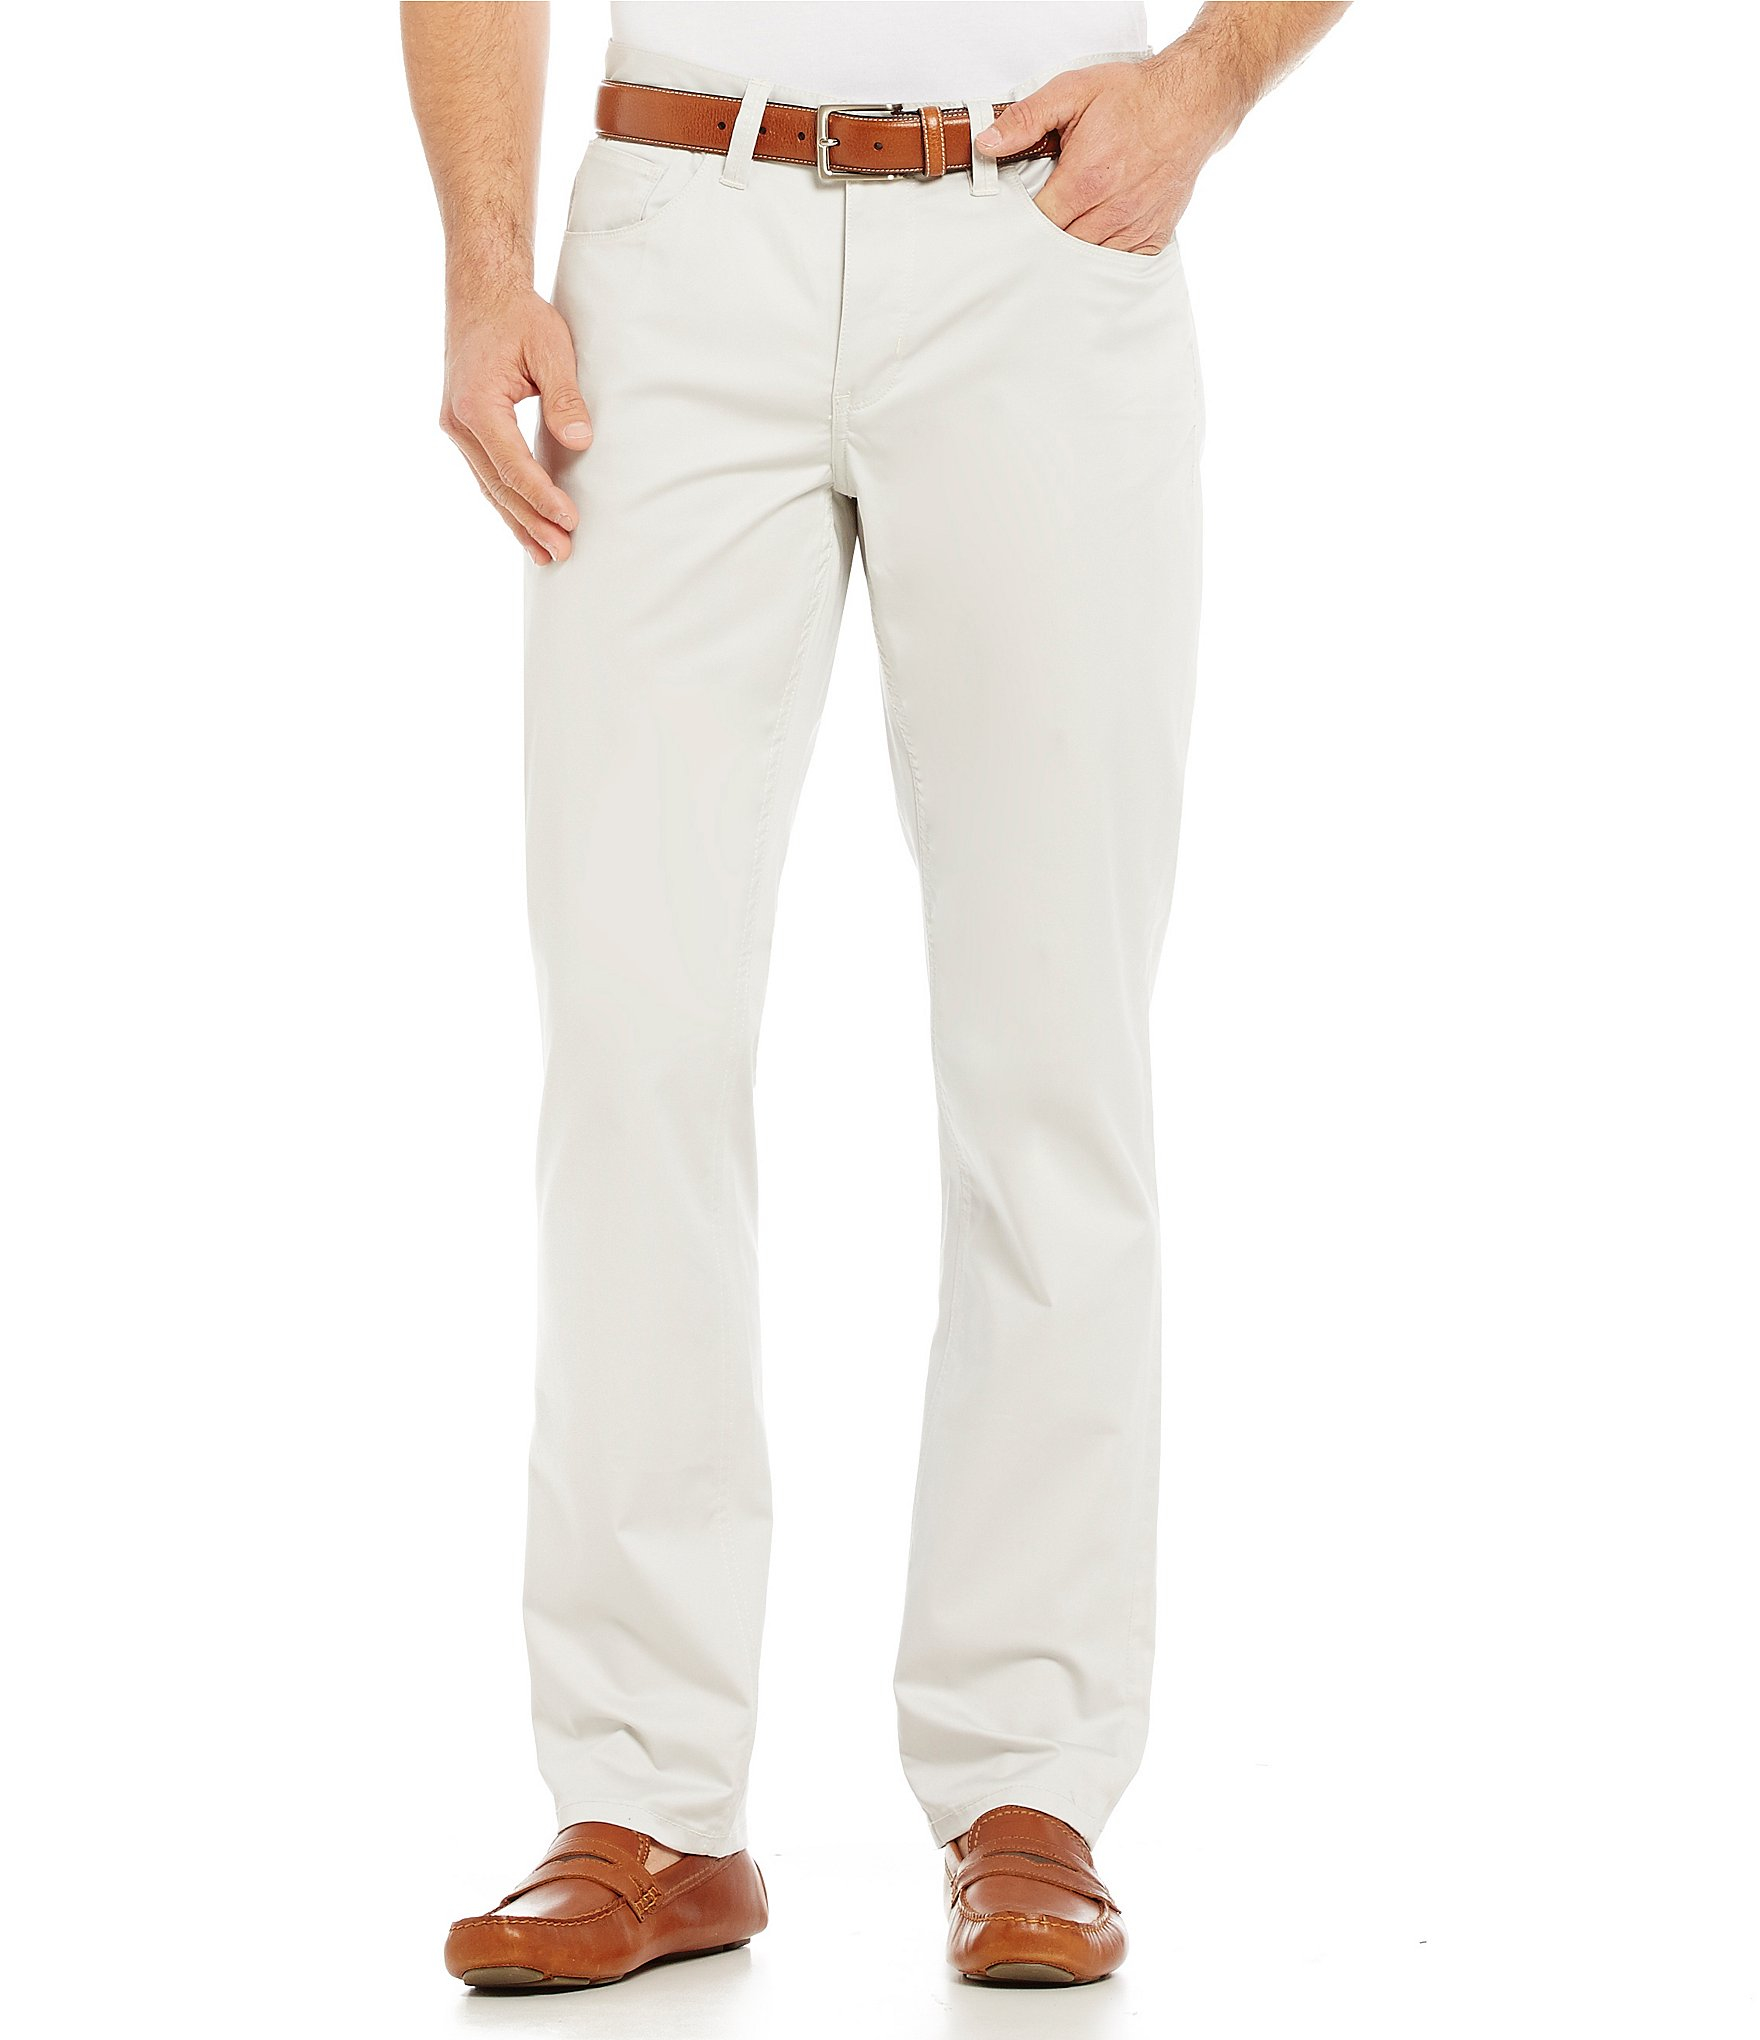 Lyst - Perry Ellis Slim-fit Flat-front Stretch Pants in Natural for Men